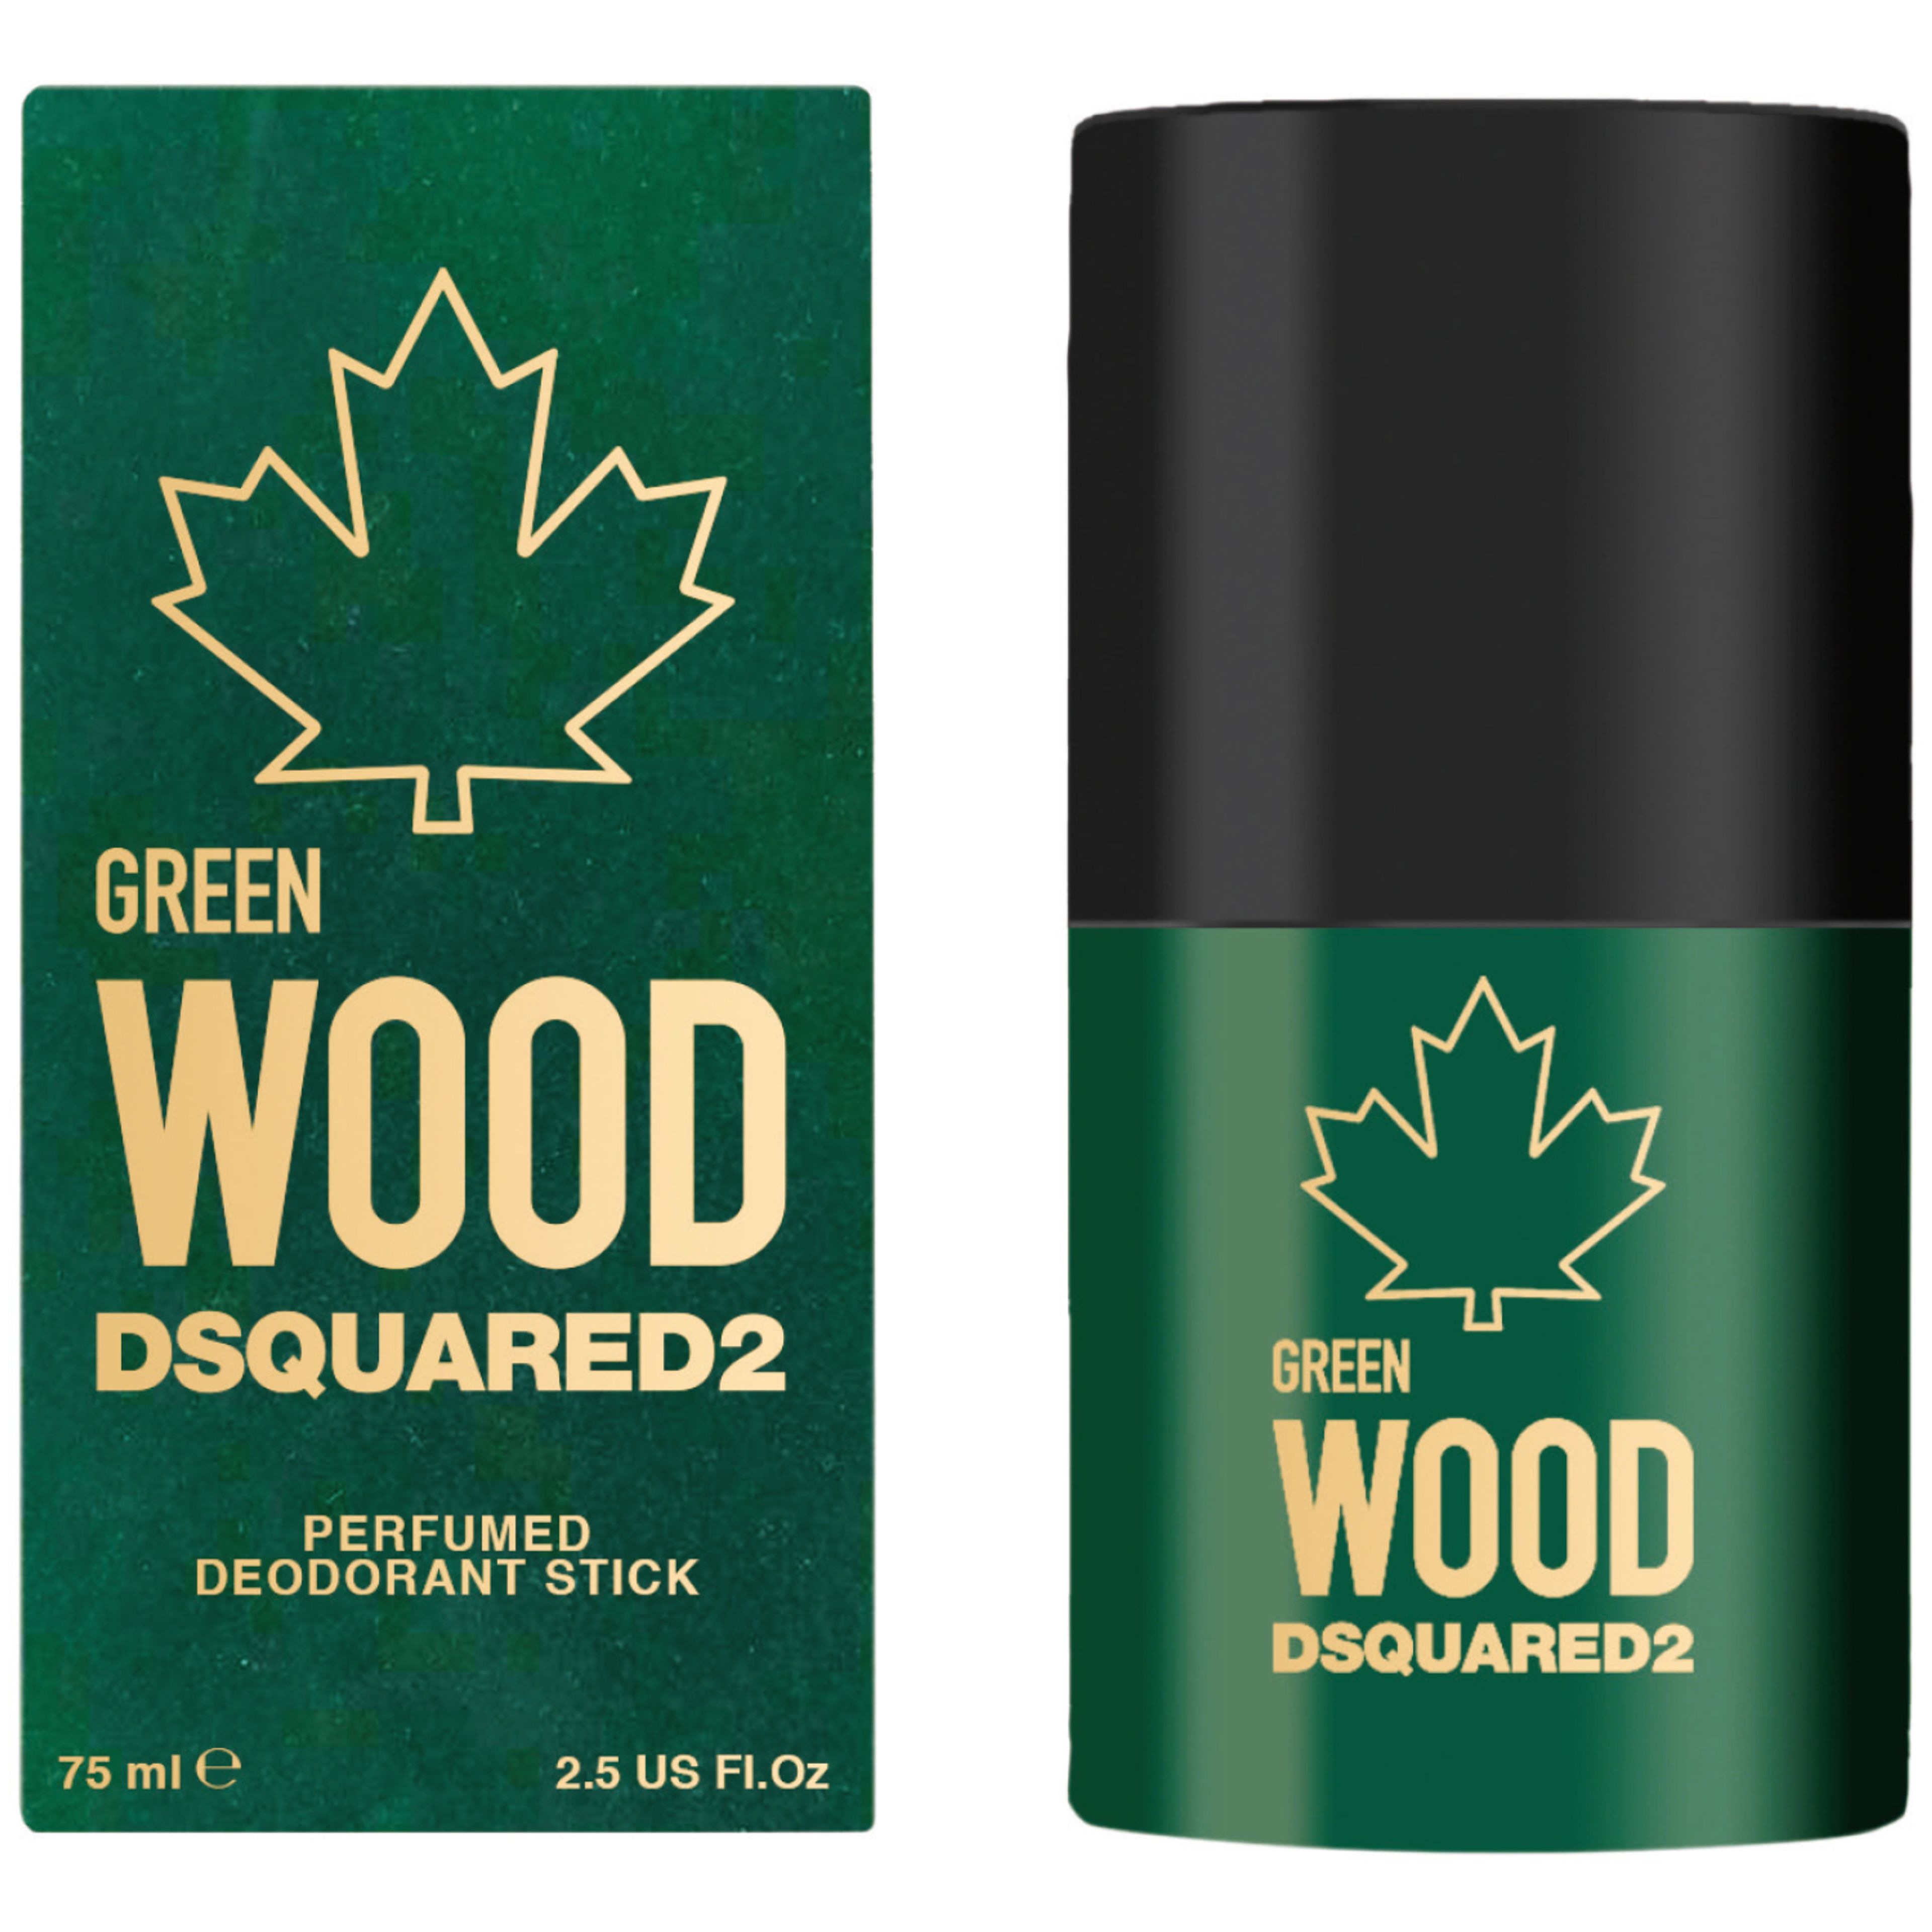 Dsquared2 Green Wood Pour Homme Perfumed Deodorant Stick 2